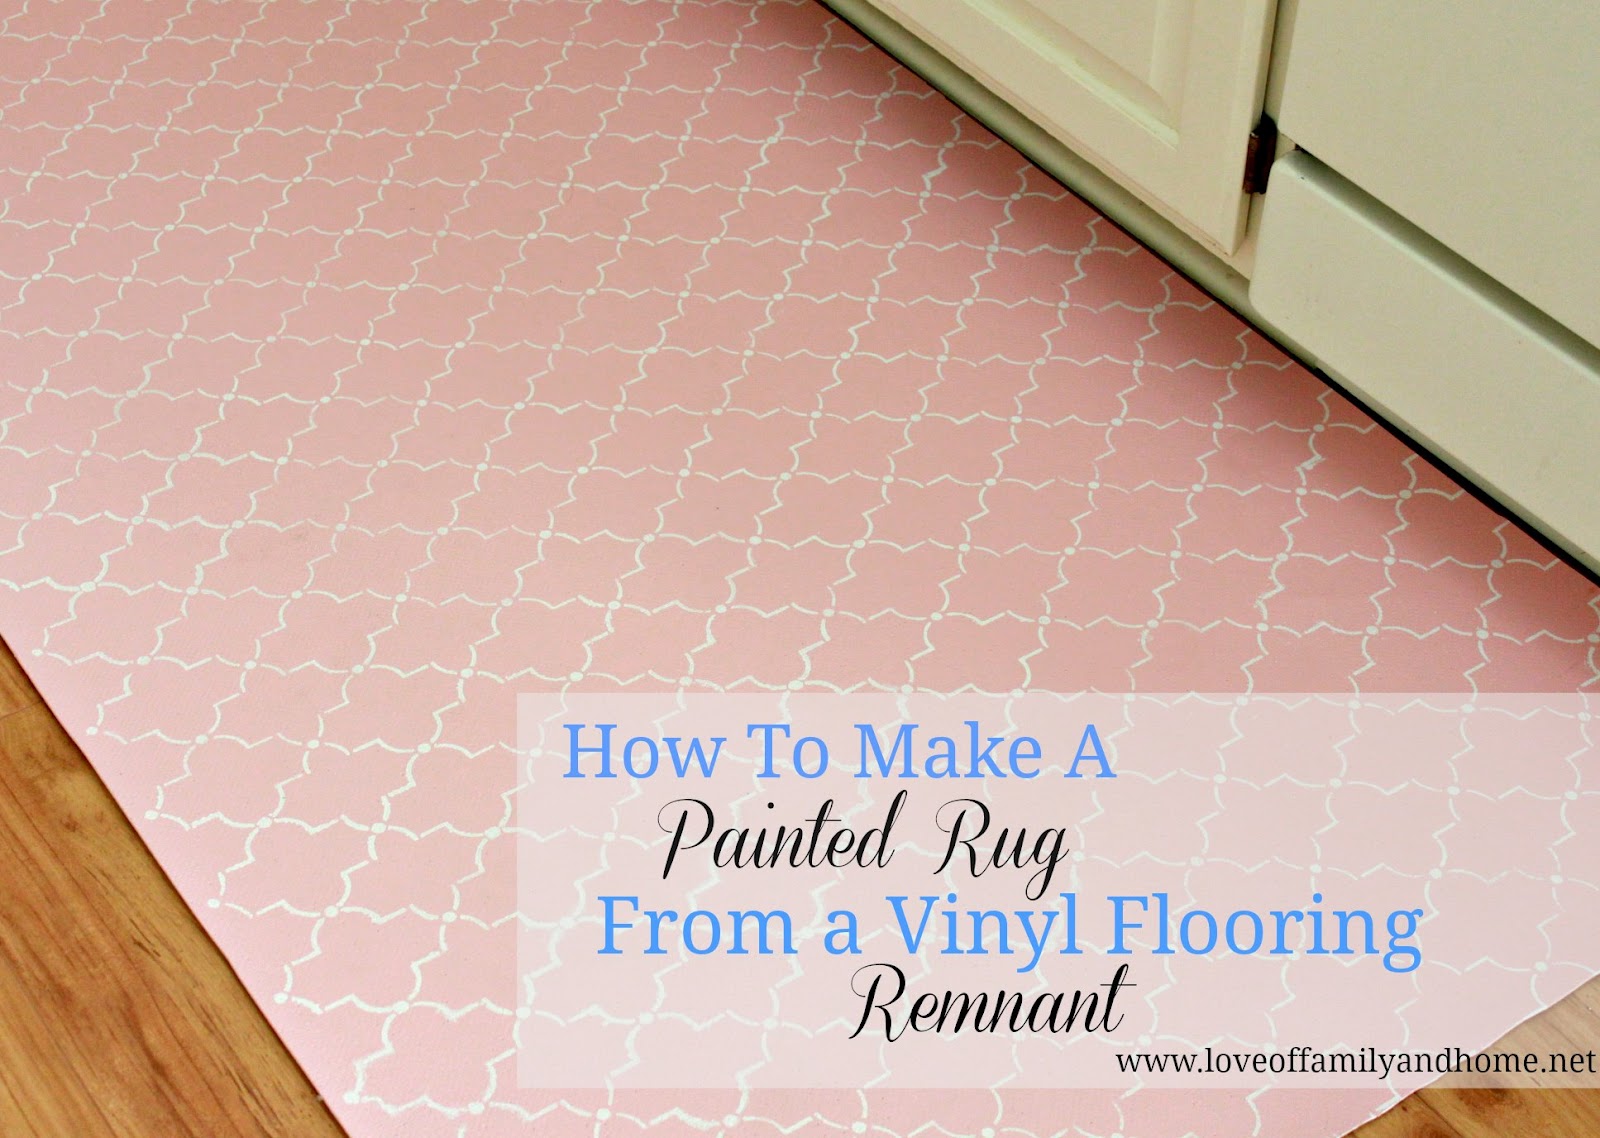 How To Paint A Rug Using Vinyl Flooring.... - Love of Family & Home